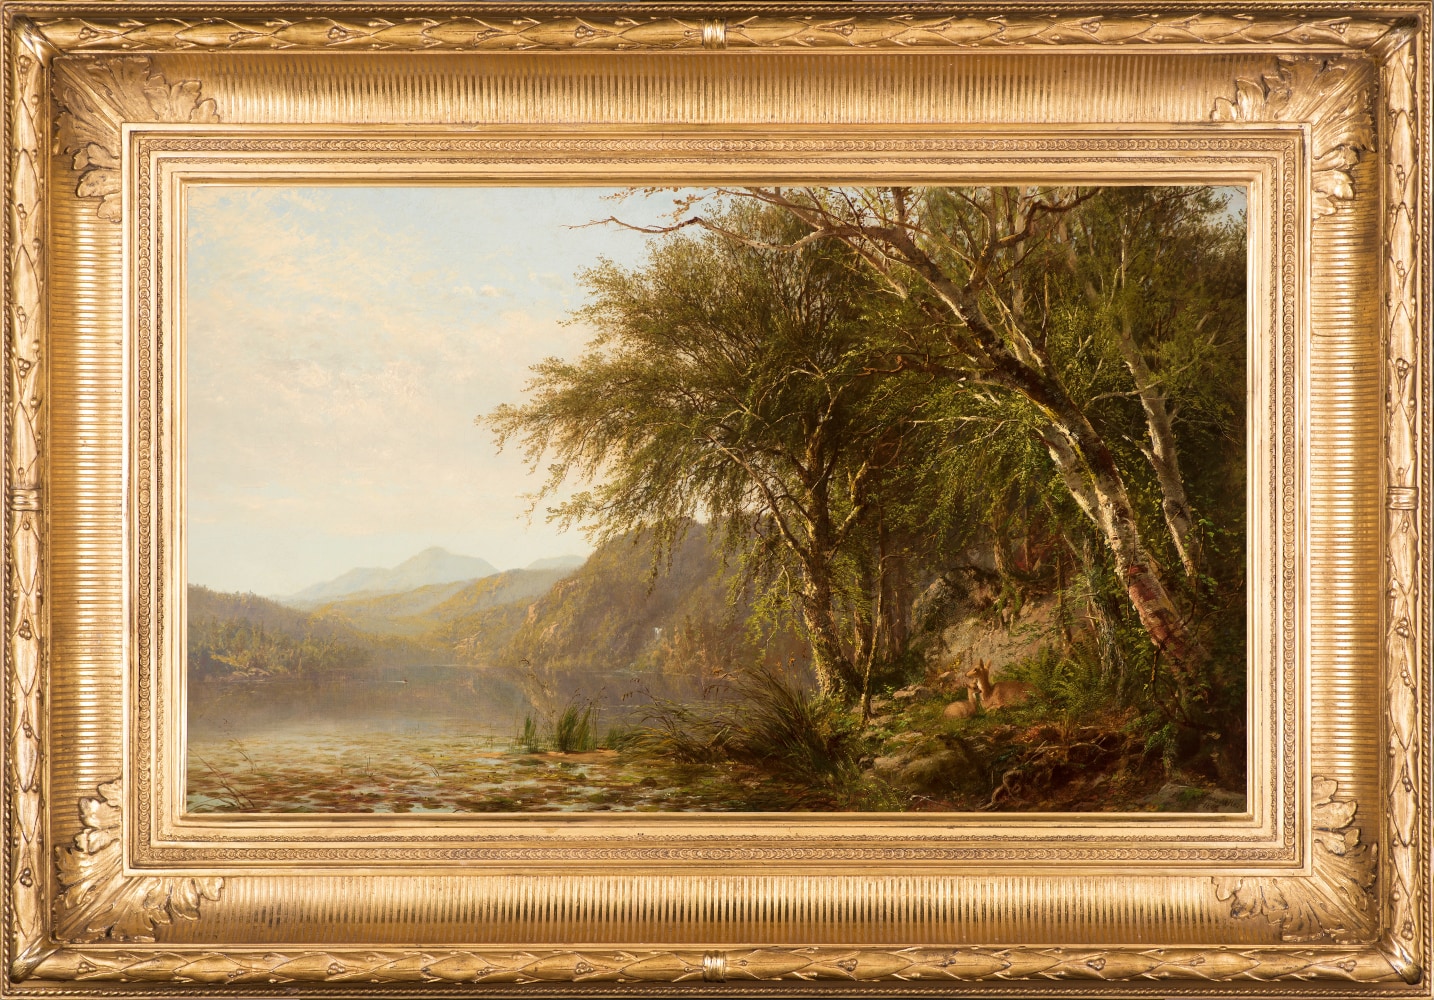 James M. Hart (1828–1901), View of Lake Placid, 1862, oil on canvas, 17 1/2 x 30 in., signed and dated lower right: James M. Hart / 1862, inscribed on verso: View on Placid Lake. / Essex Co. N. Y. / Painted by James M. Hart / 1862 (framed)